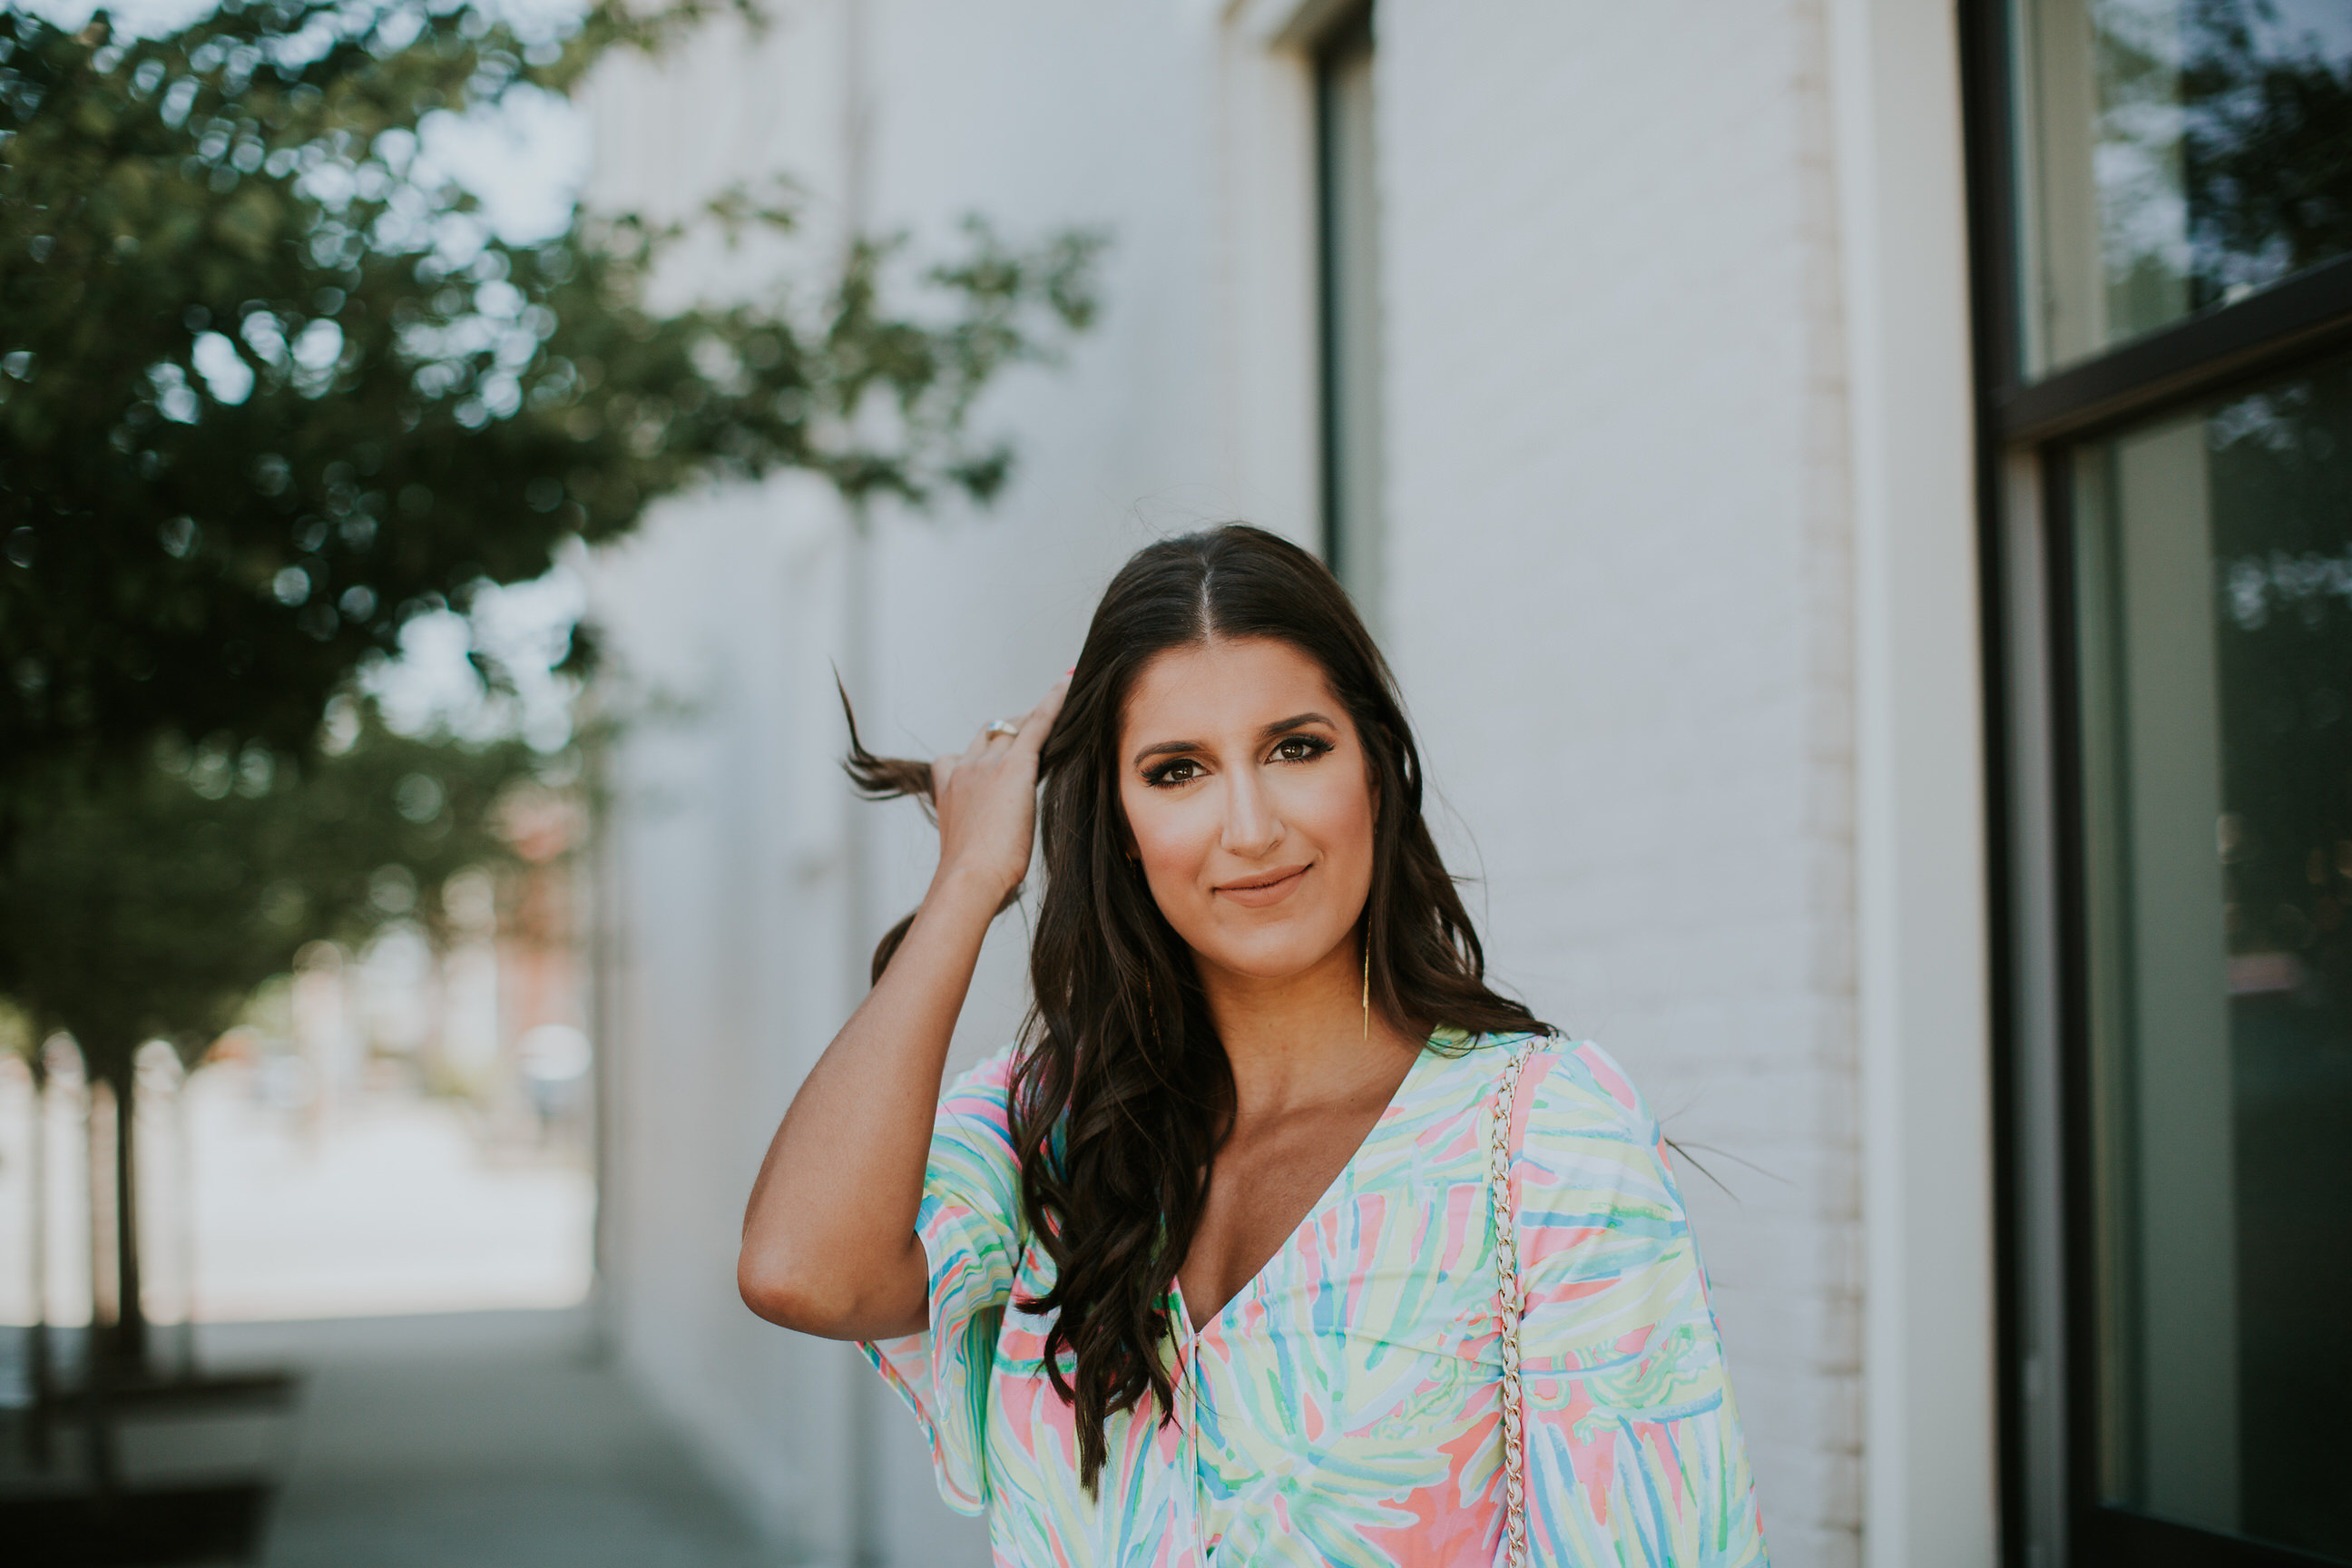 summer print romper, lilly pulitzer romper, lilly pulitzer madilyn romper, tory burch parker chain wallet, summer styles, summer outfit, summertime fashion, summertime prints, lilly pulitzer prints, lilly pulitzer promo, lilly pulitzer sale // grace wainwright a southern drawl